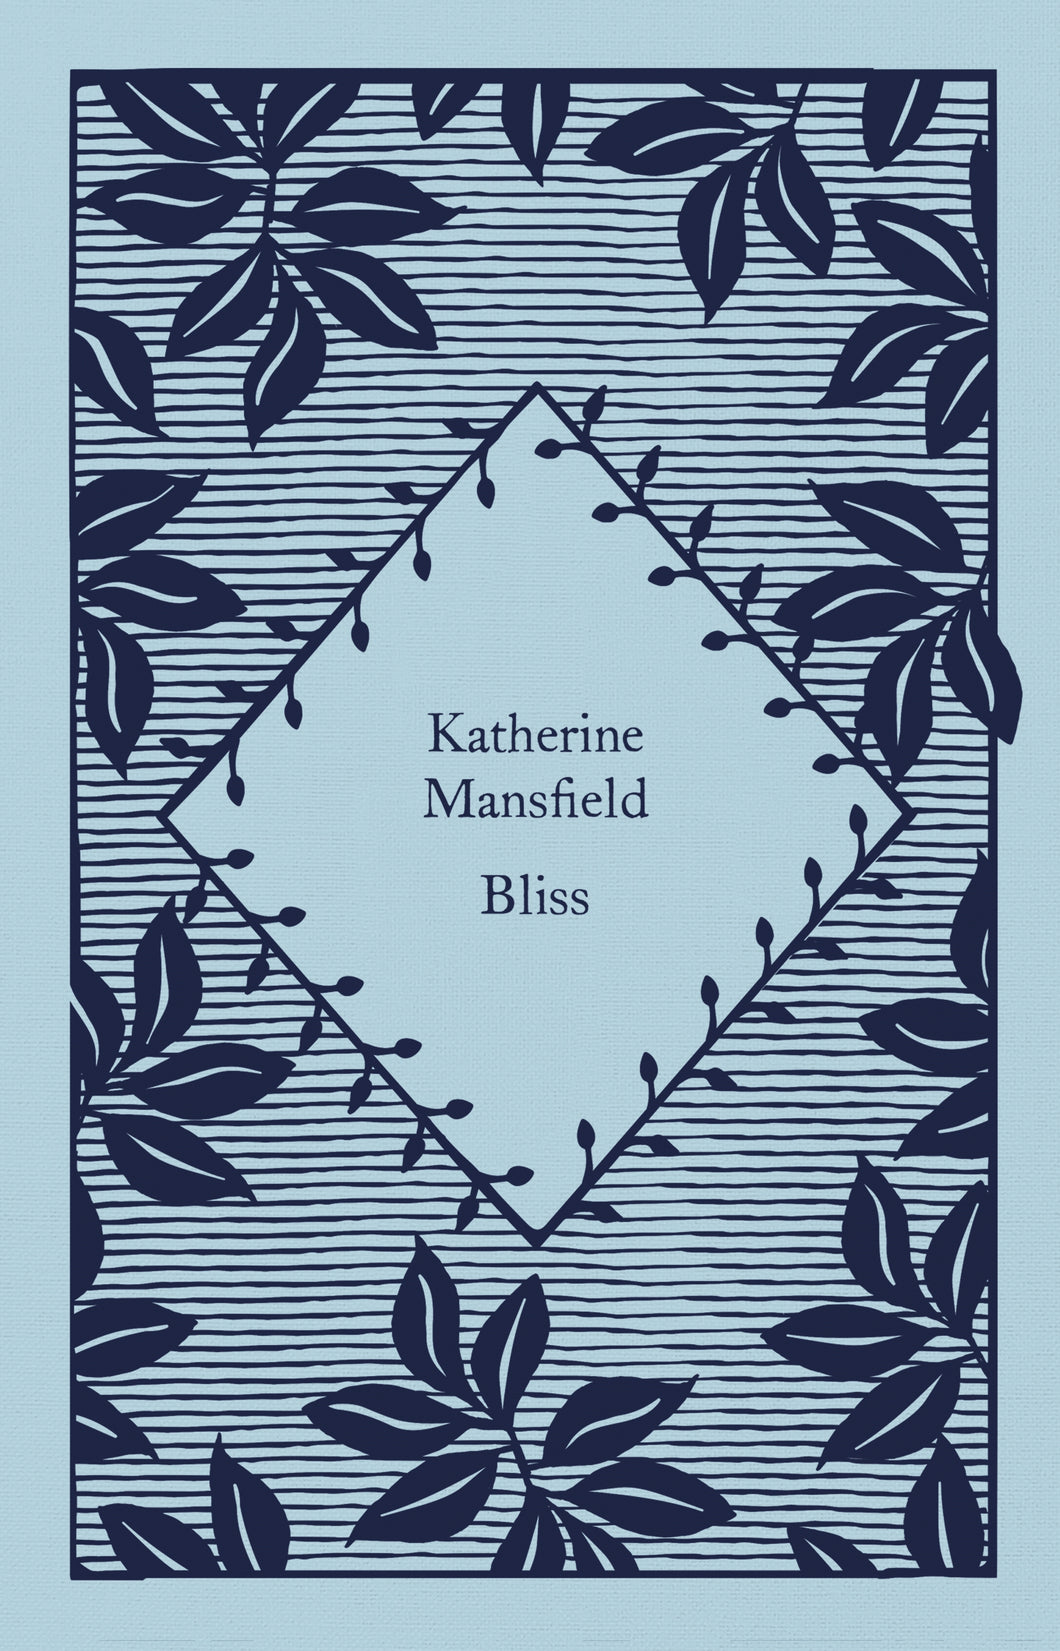 Bliss by Katherine Mansfield